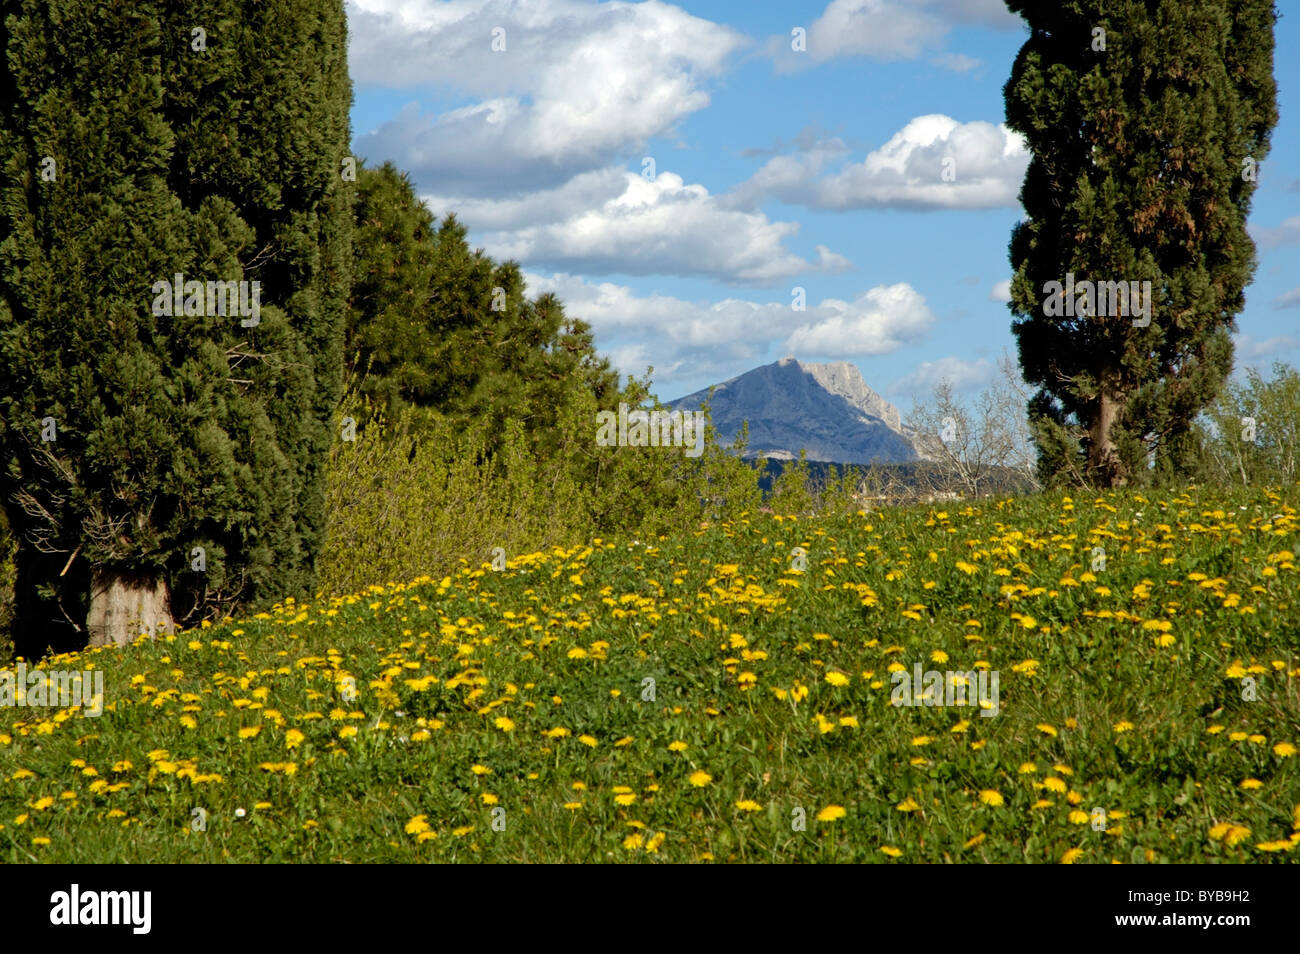 Cypress trees in a meadow in springtime with Montagne Sainte-Victoire in the background, Aix-en-Provence, France. Stock Photo